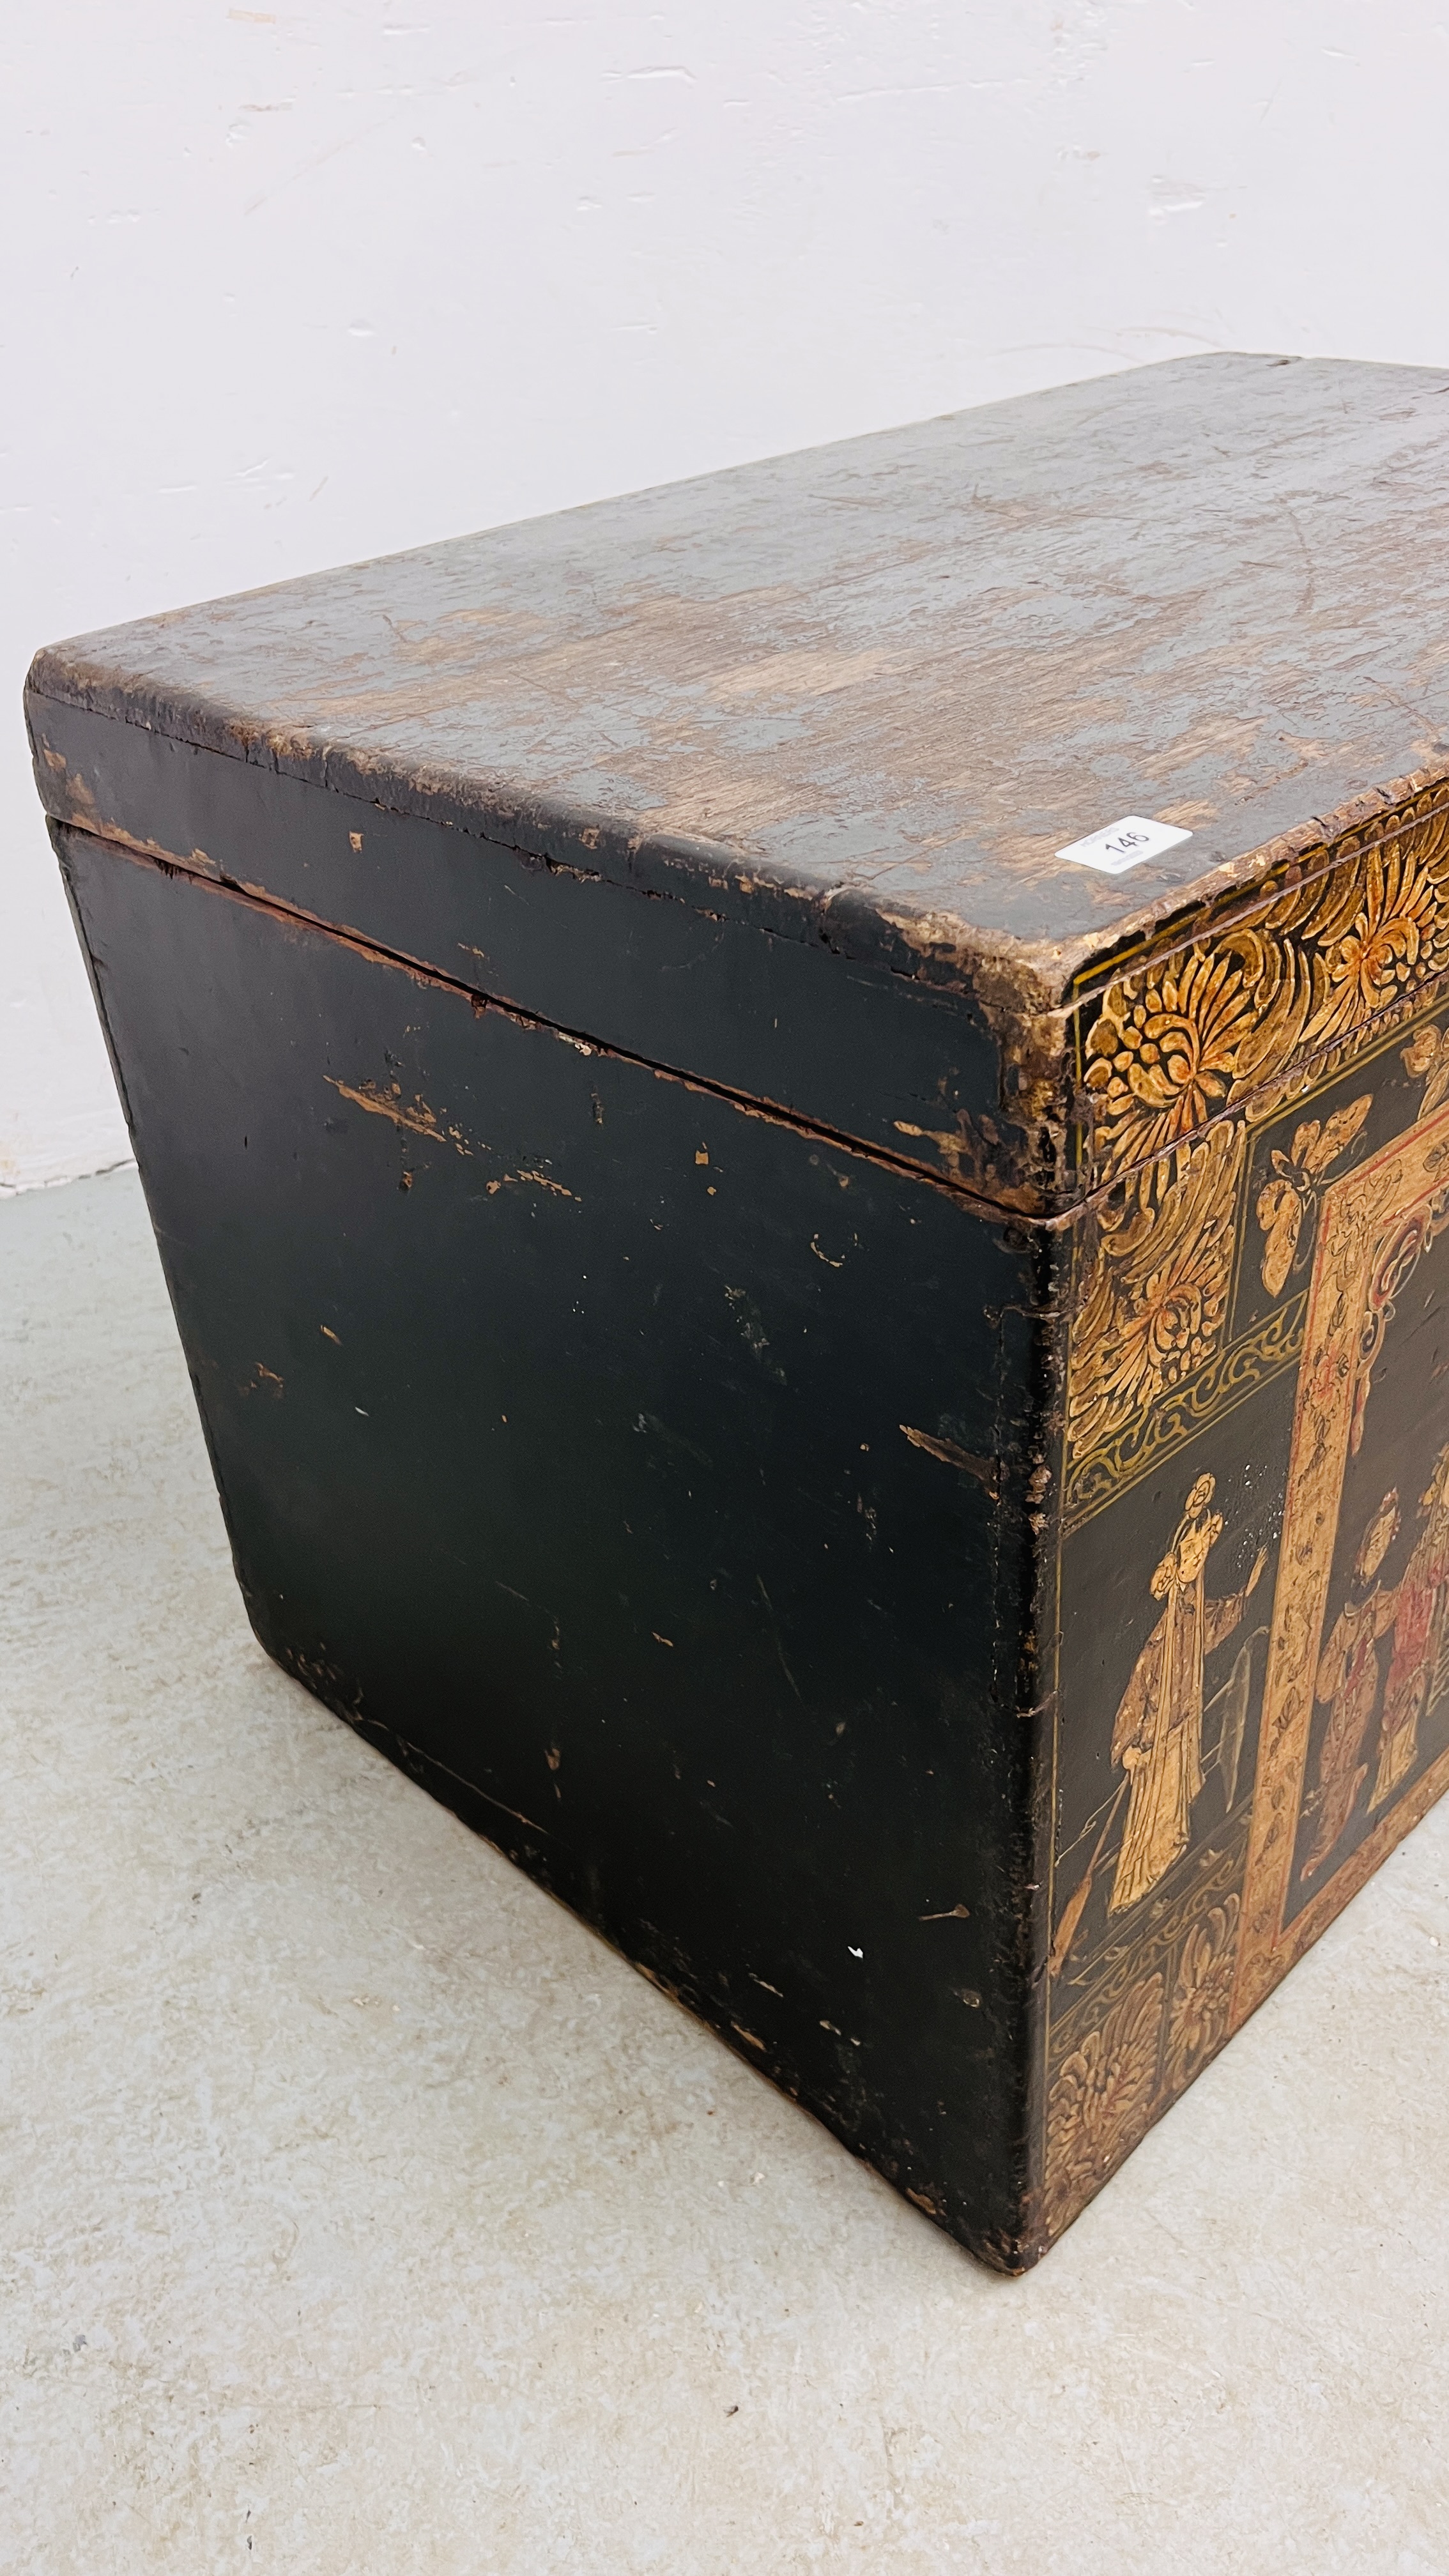 AN ANTIQUE JAPANESE CAMPHOR WOOD THEATRICAL COSTUME TRUNK THE FRONT PANEL DECORATED WITH FIGURES - Image 8 of 10